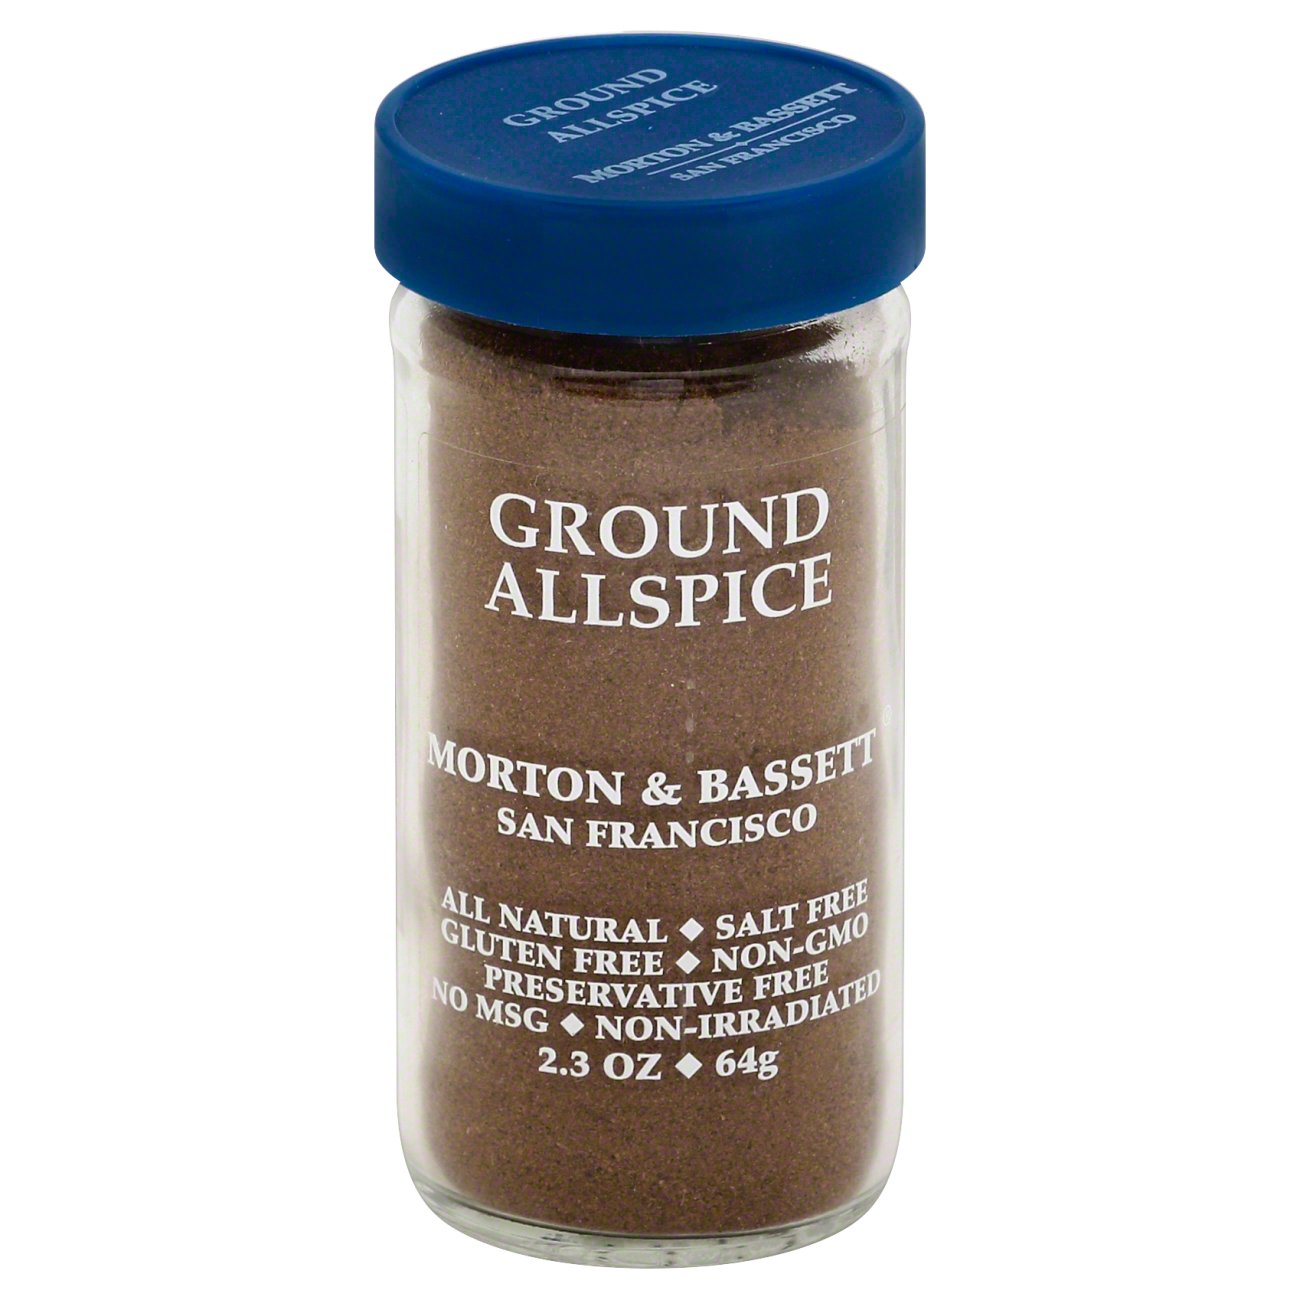 McCormick Ground Allspice - Shop Herbs & Spices at H-E-B